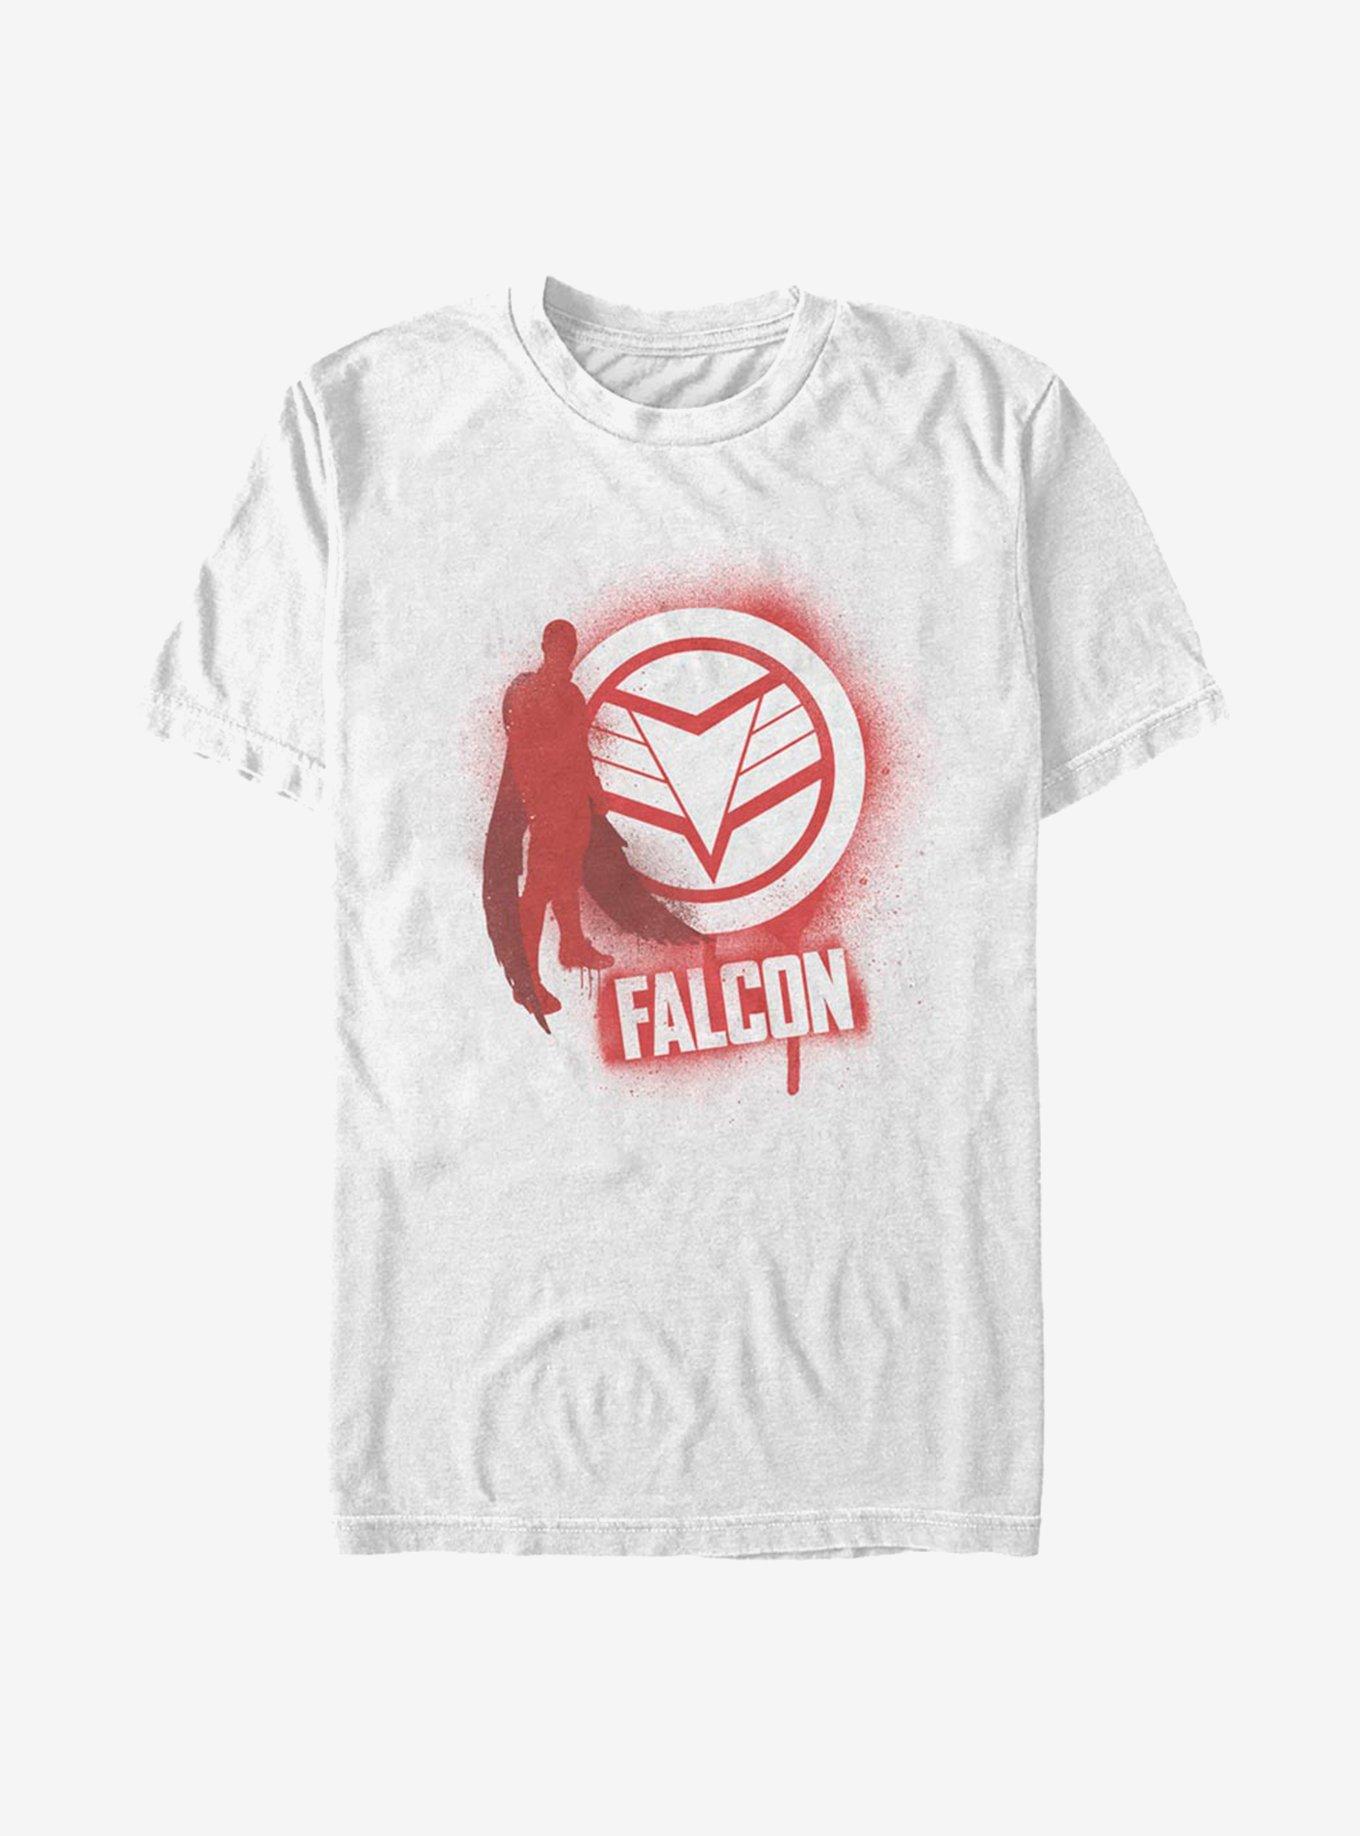 Marvel The Falcon And The Winter Soldier Falcon Spray Paint T-Shirt, WHITE, hi-res